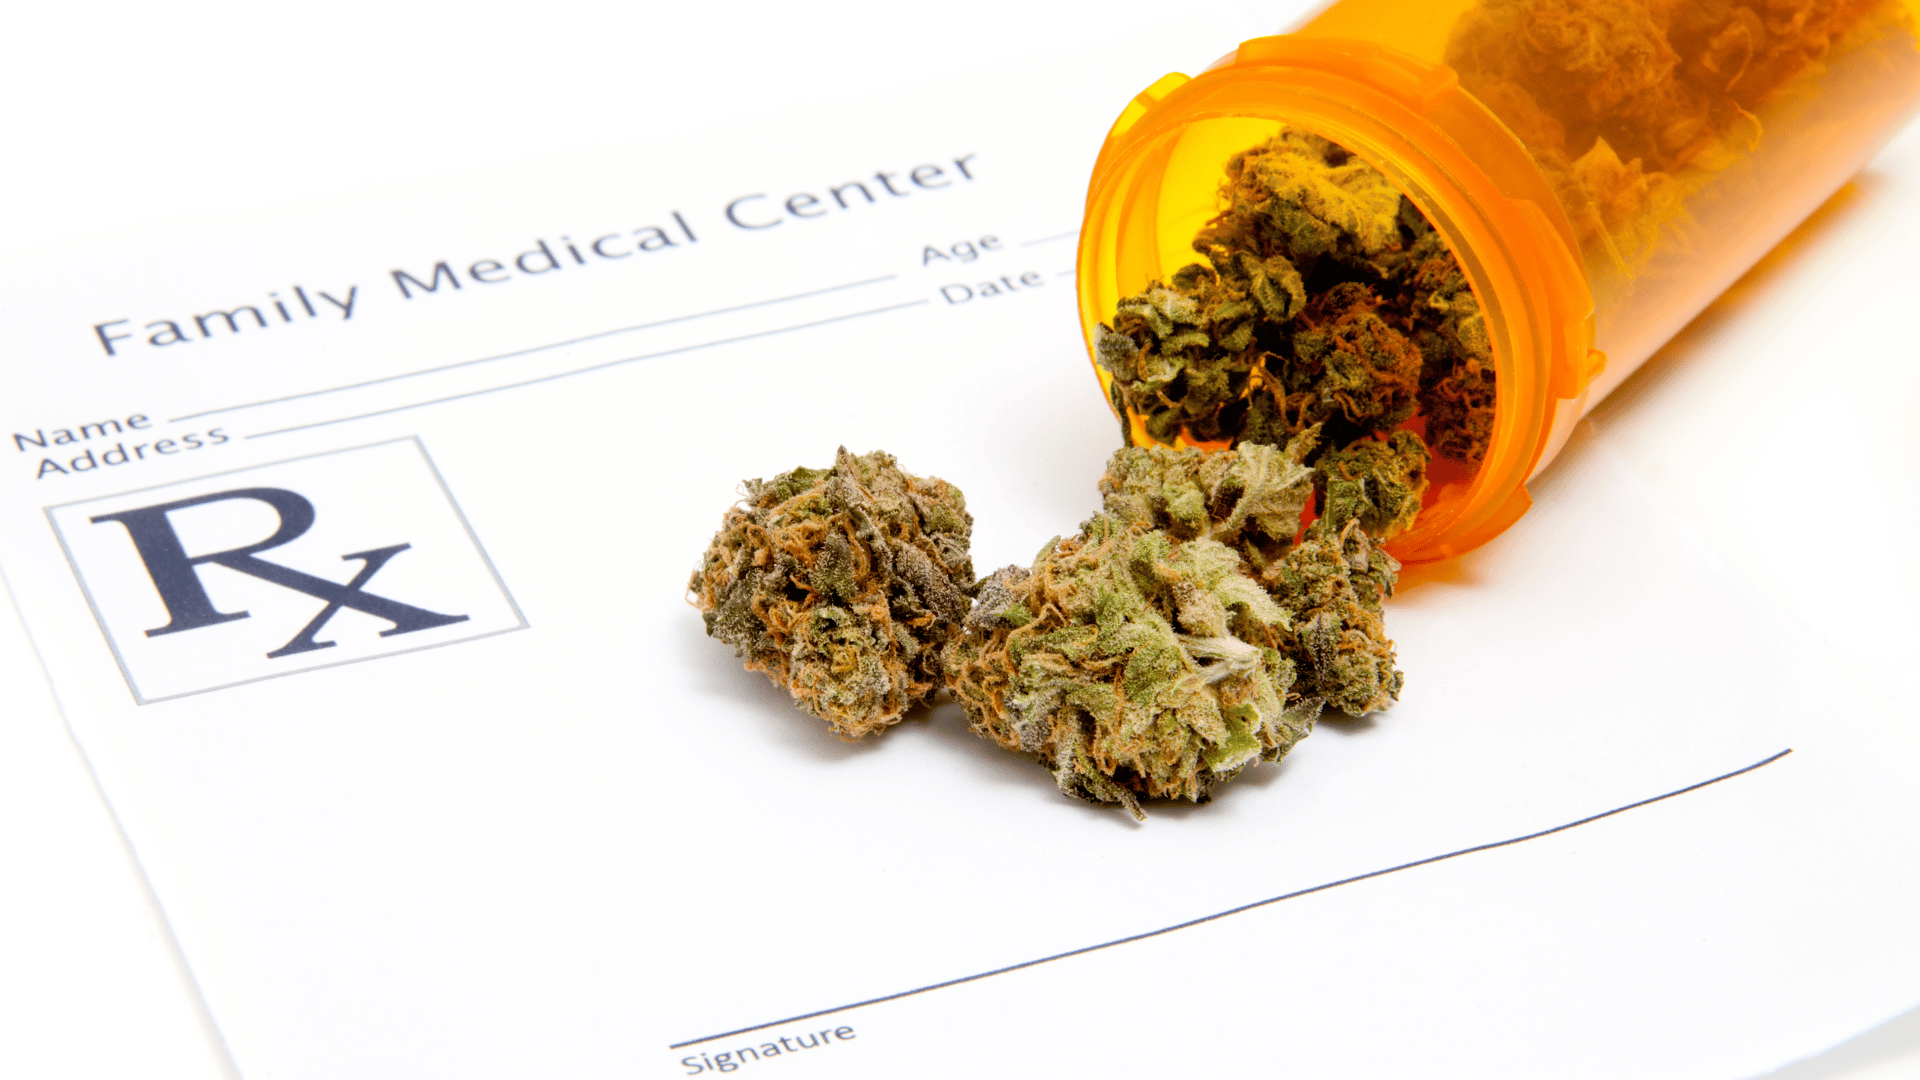 Marijuana spilling out of a small orange medication container over an RX prescription pad